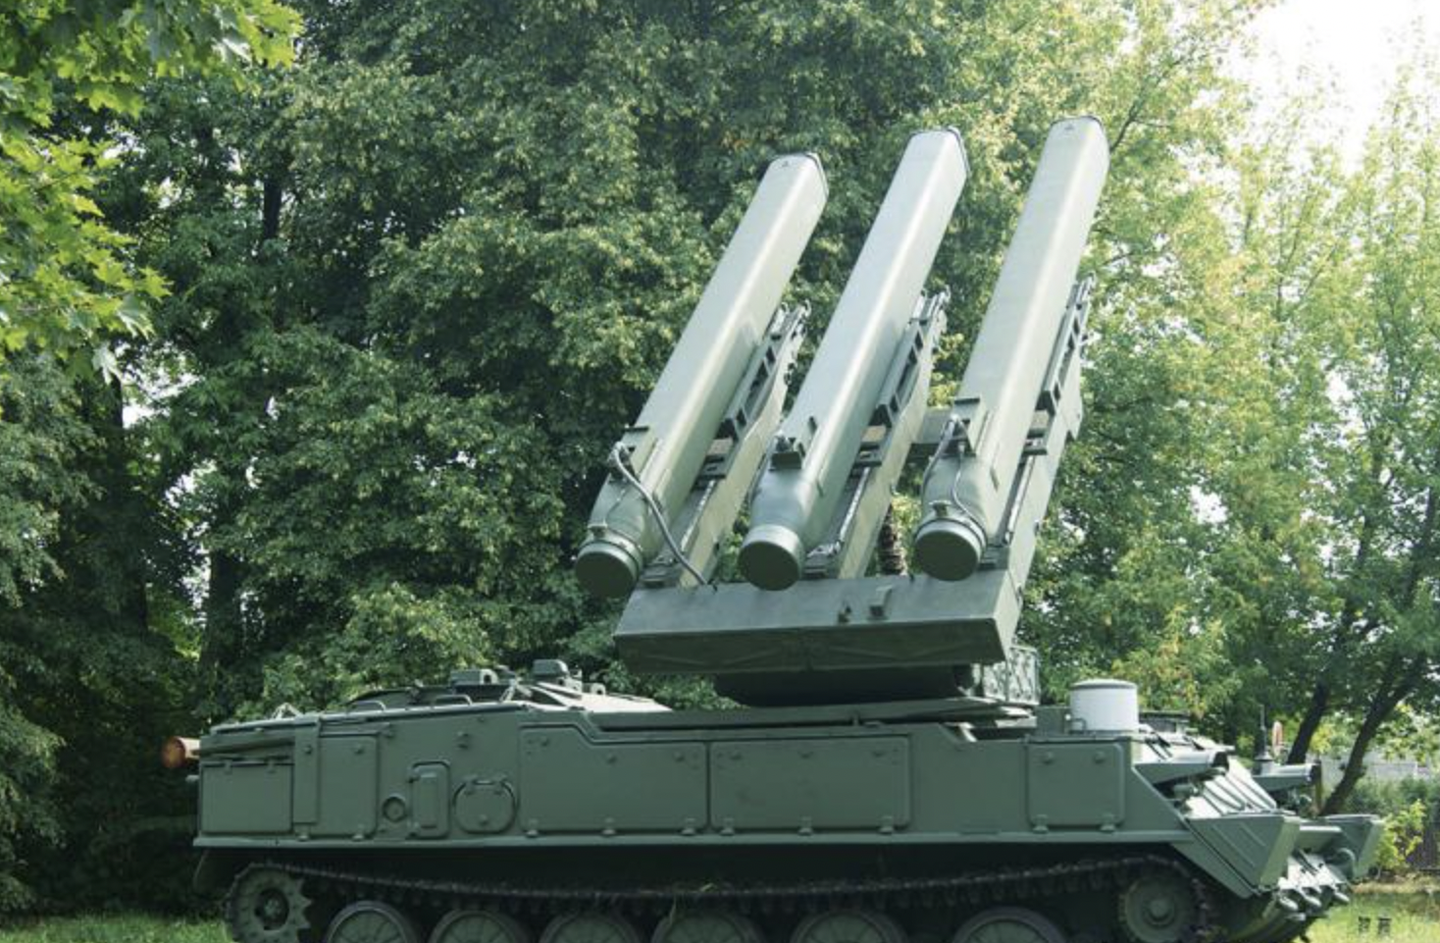 The Buk SAM system adapted for the RIM-162 Evolved SeaSparrow missile by Polish WZU Defense Express Slovakia to Send the MiG-29 Fighters and the Kub SAM Systems that Can Be Used with the RIM-7 Sea Sparrow Missile